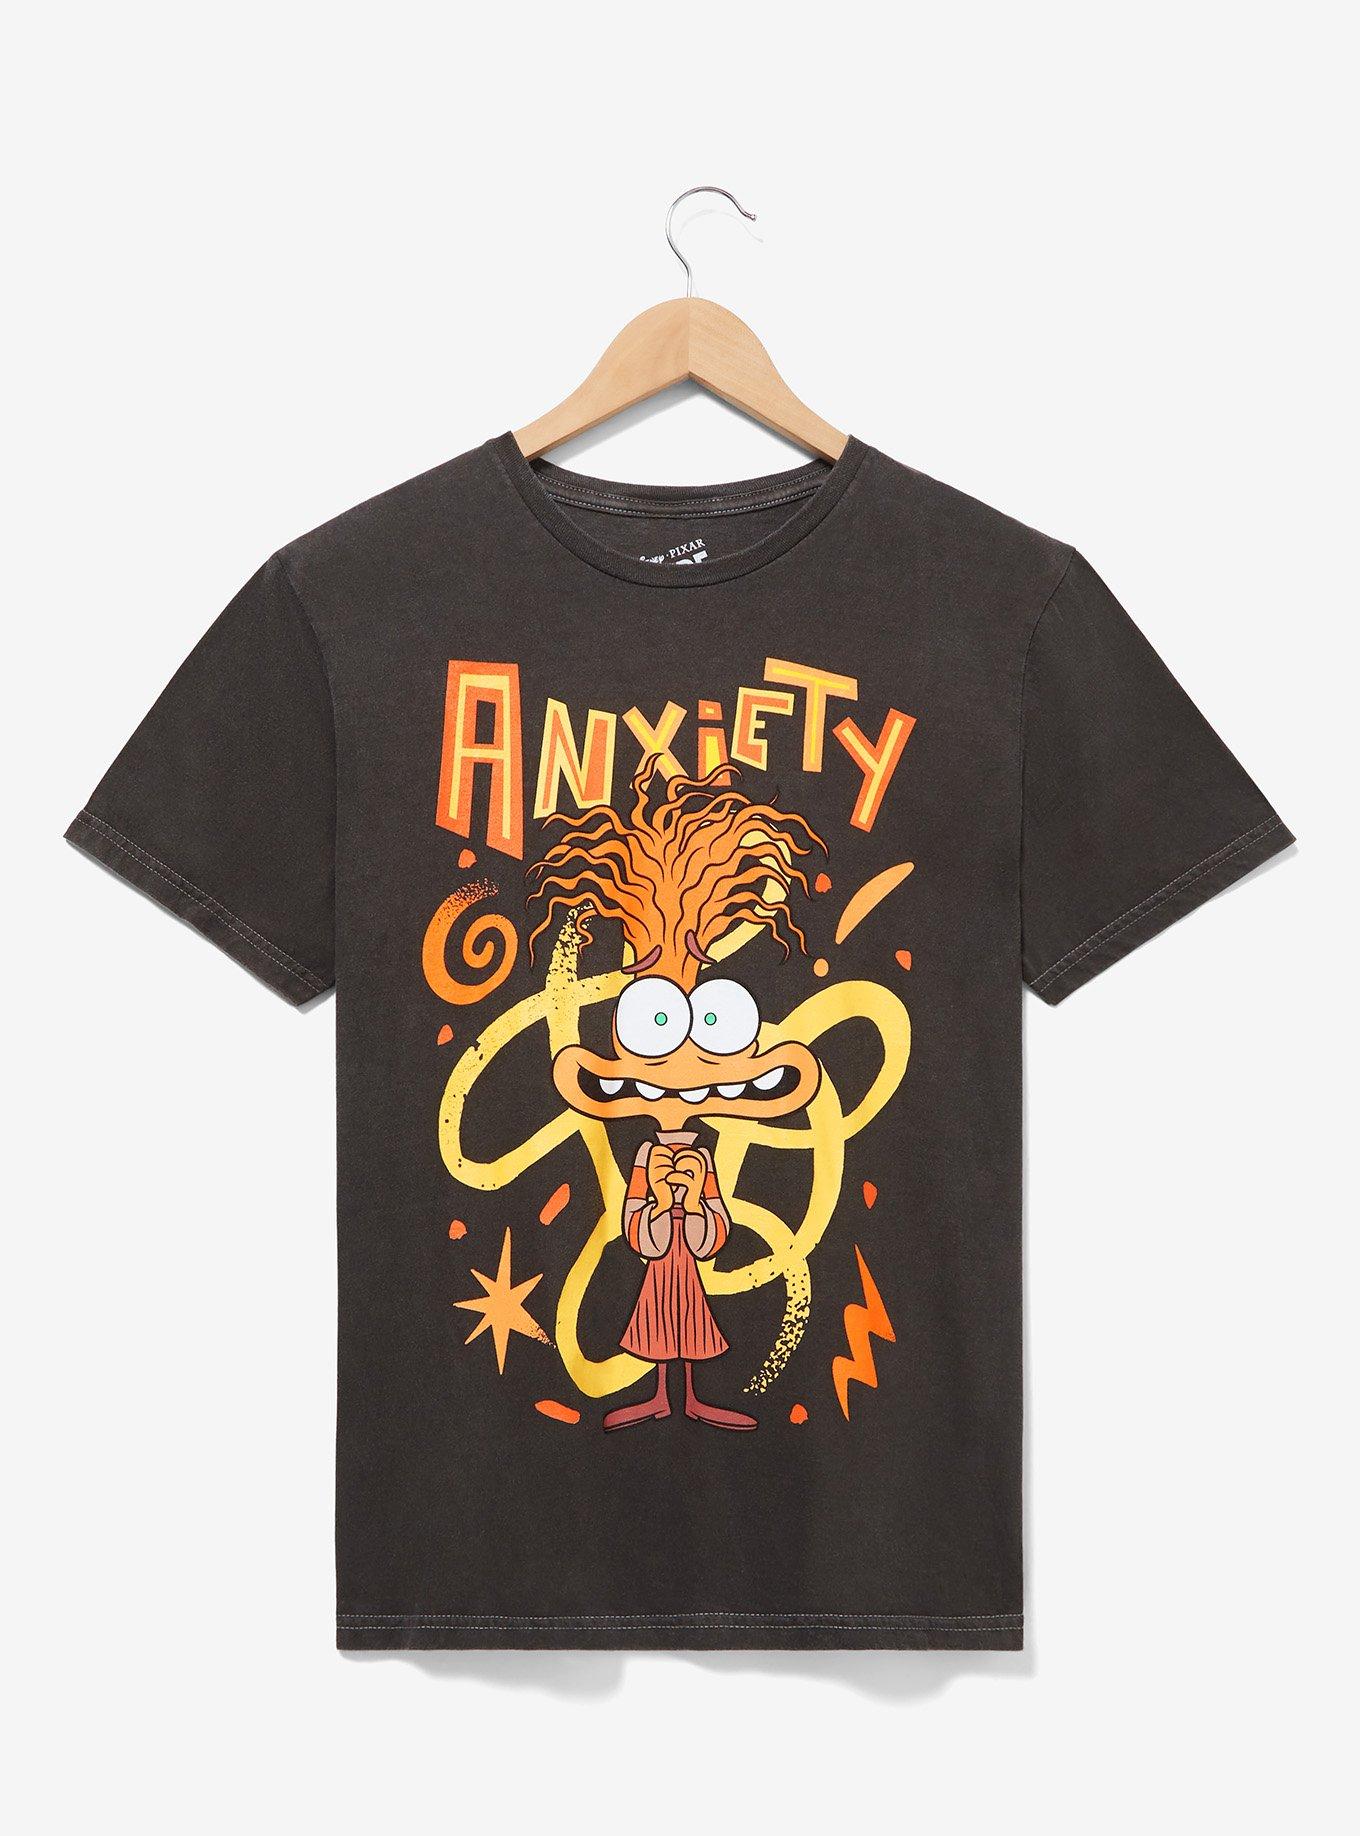 Disney Pixar Inside Out 2 Anxiety Graphic T-Shirt — BoxLunch Exclusive, , hi-res